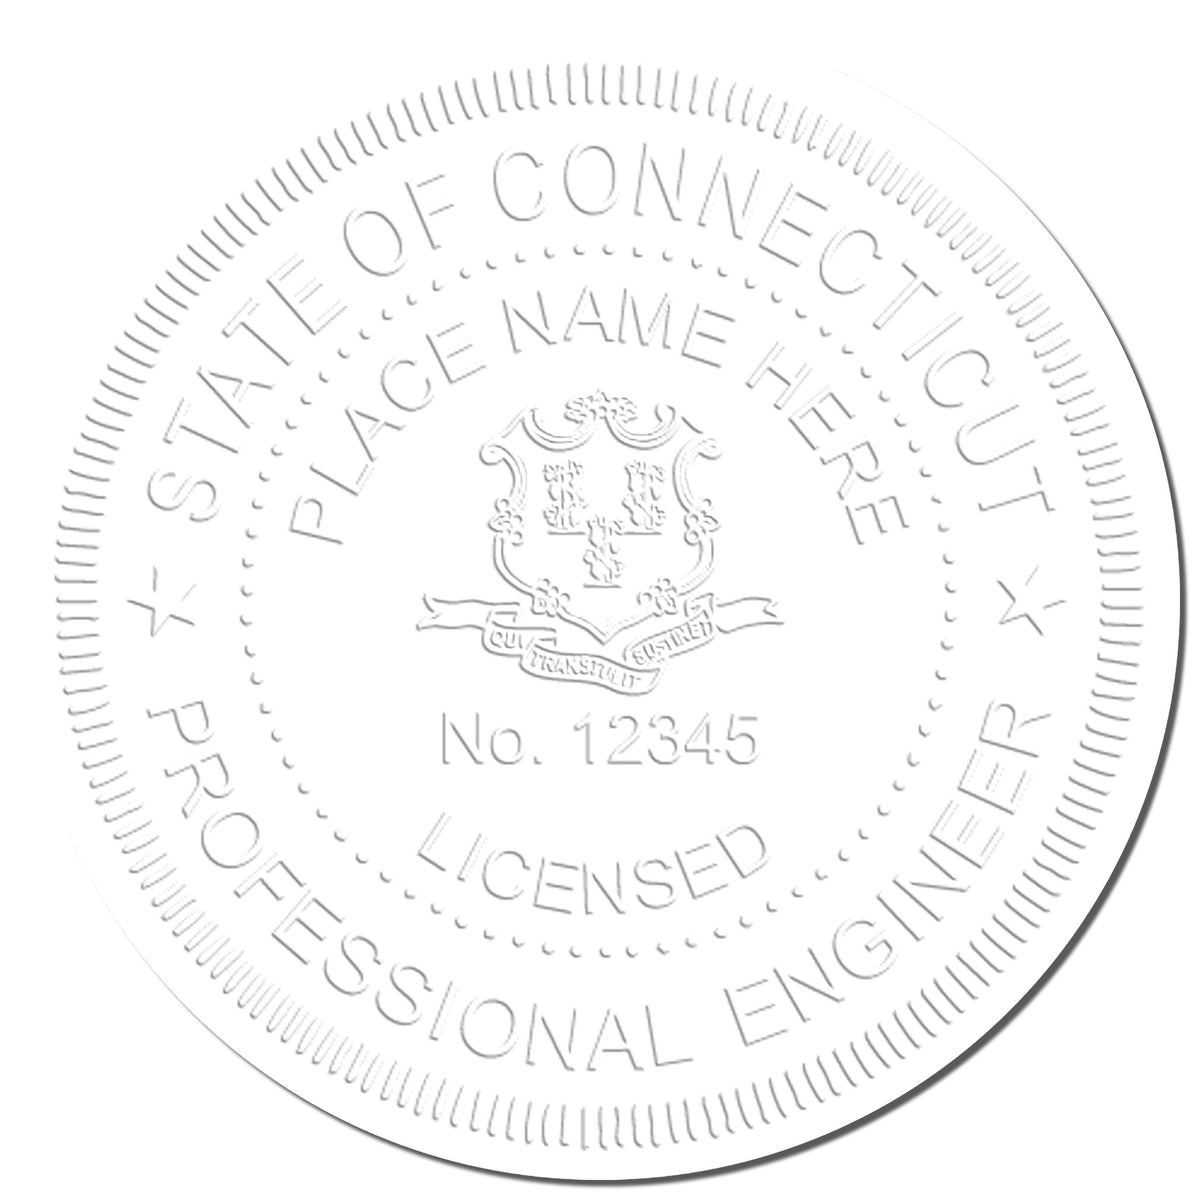 Another Example of a stamped impression of the Connecticut Engineer Desk Seal on a piece of office paper.